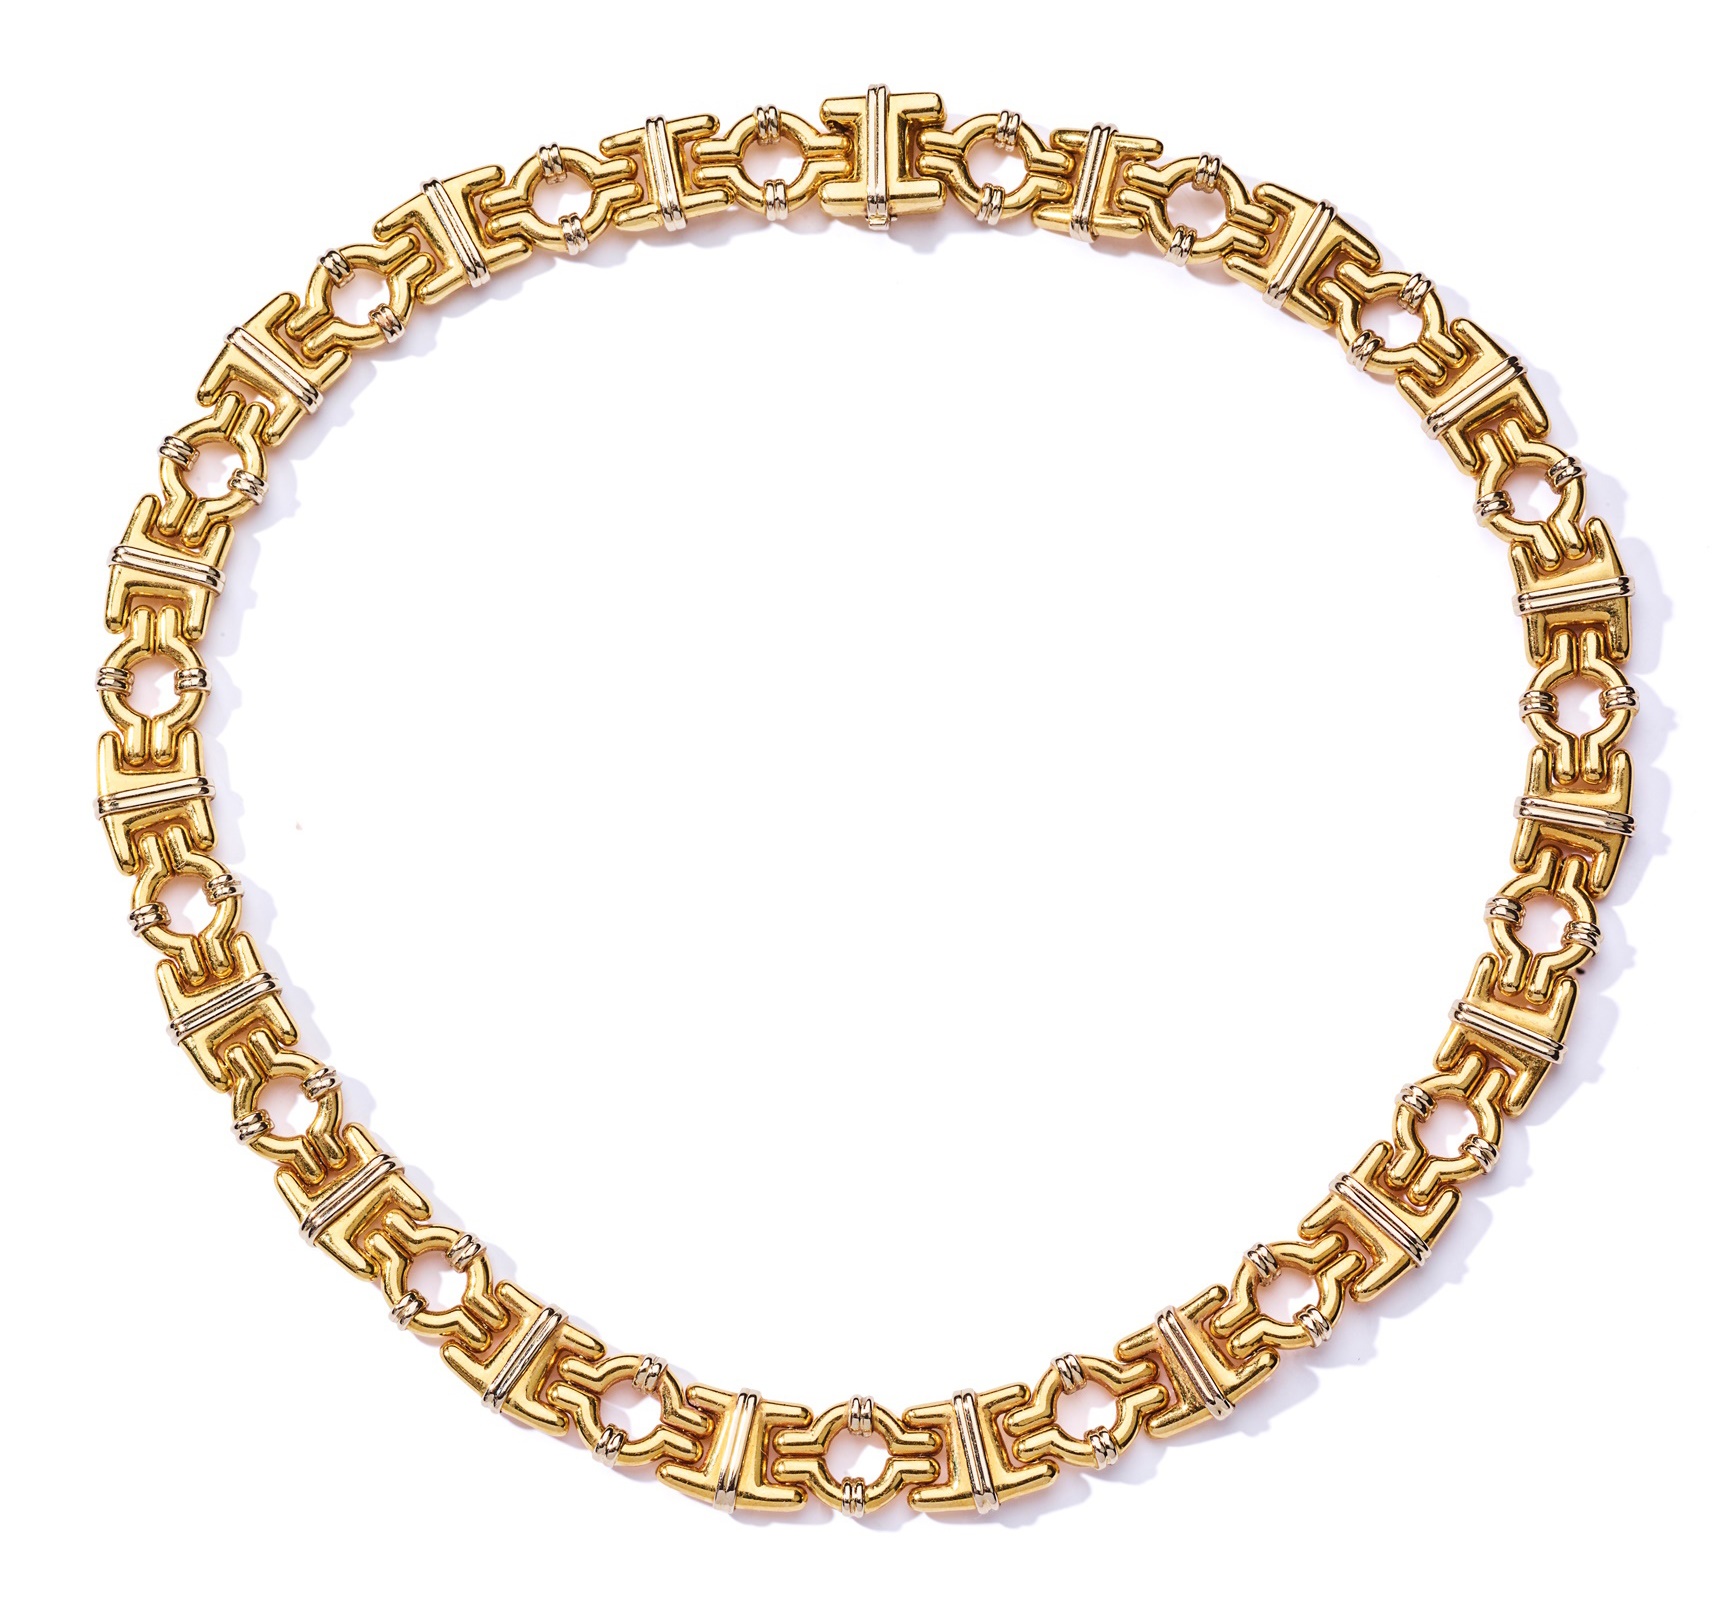 LOT 87 | KRIA: A FANCY-LINK NECKLACE | £1,500 - £2,000 + fees